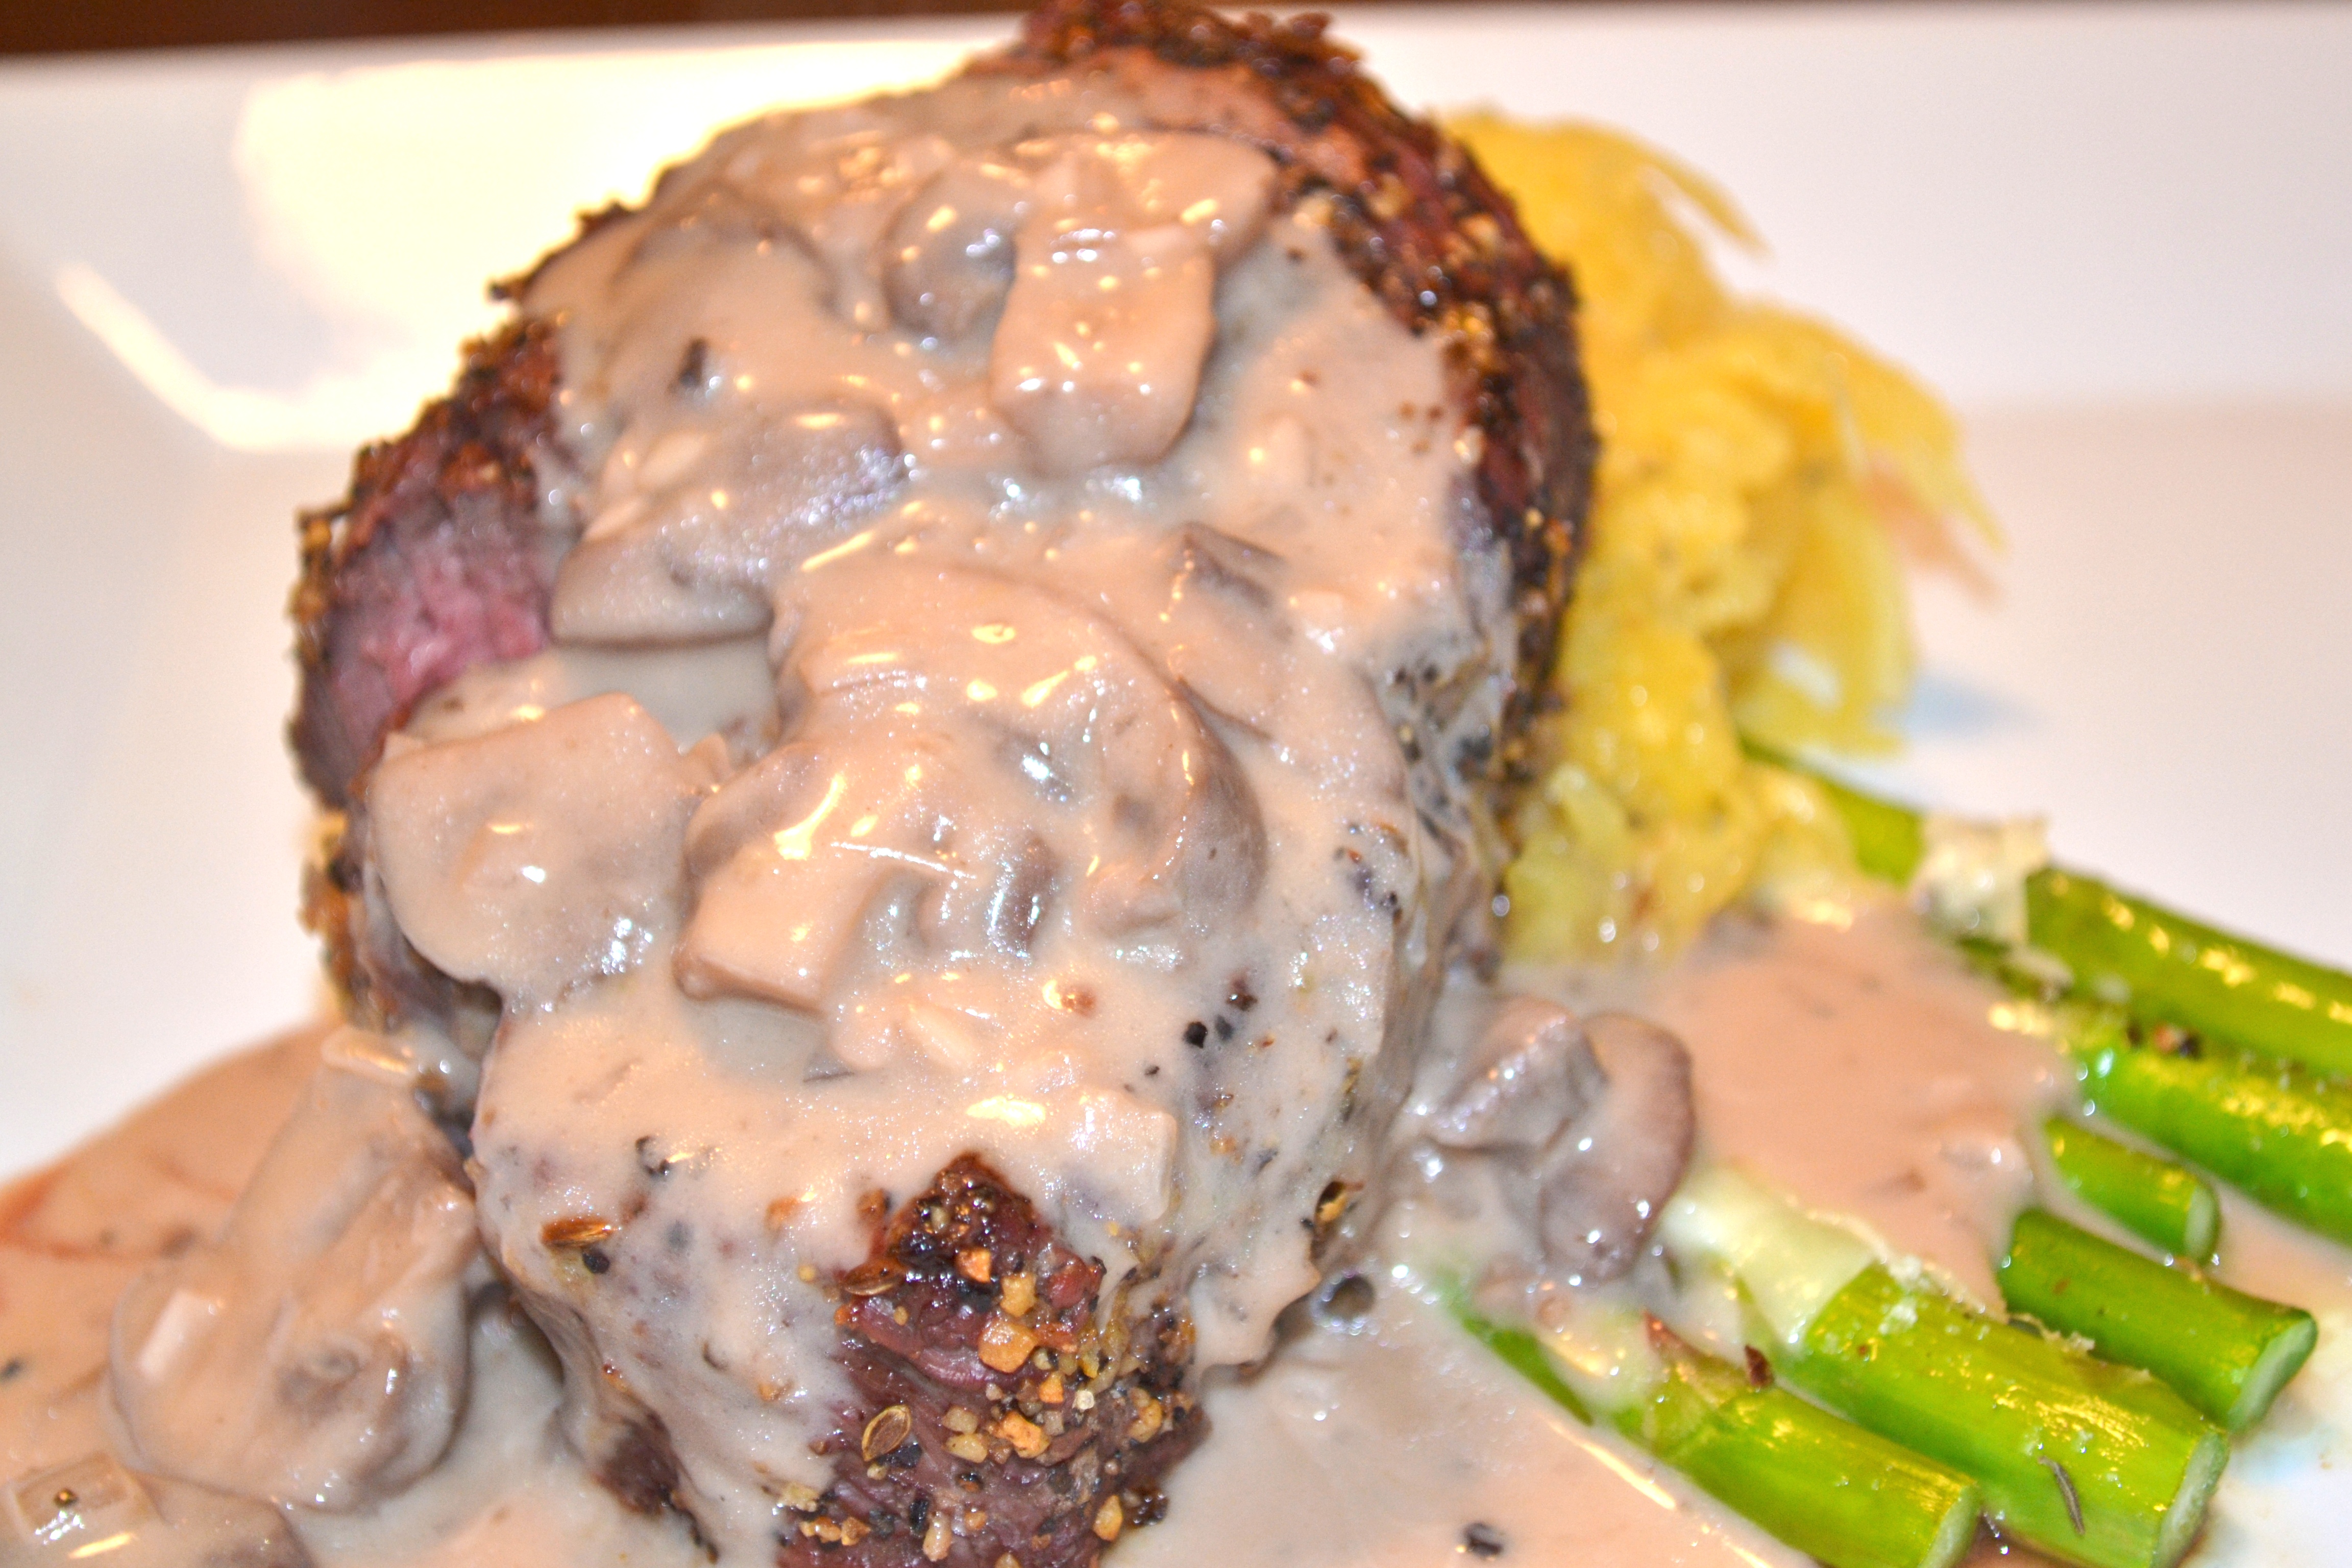 Grilled Filet Mignon with a Brandy-Red Wine Mushroom Sauce